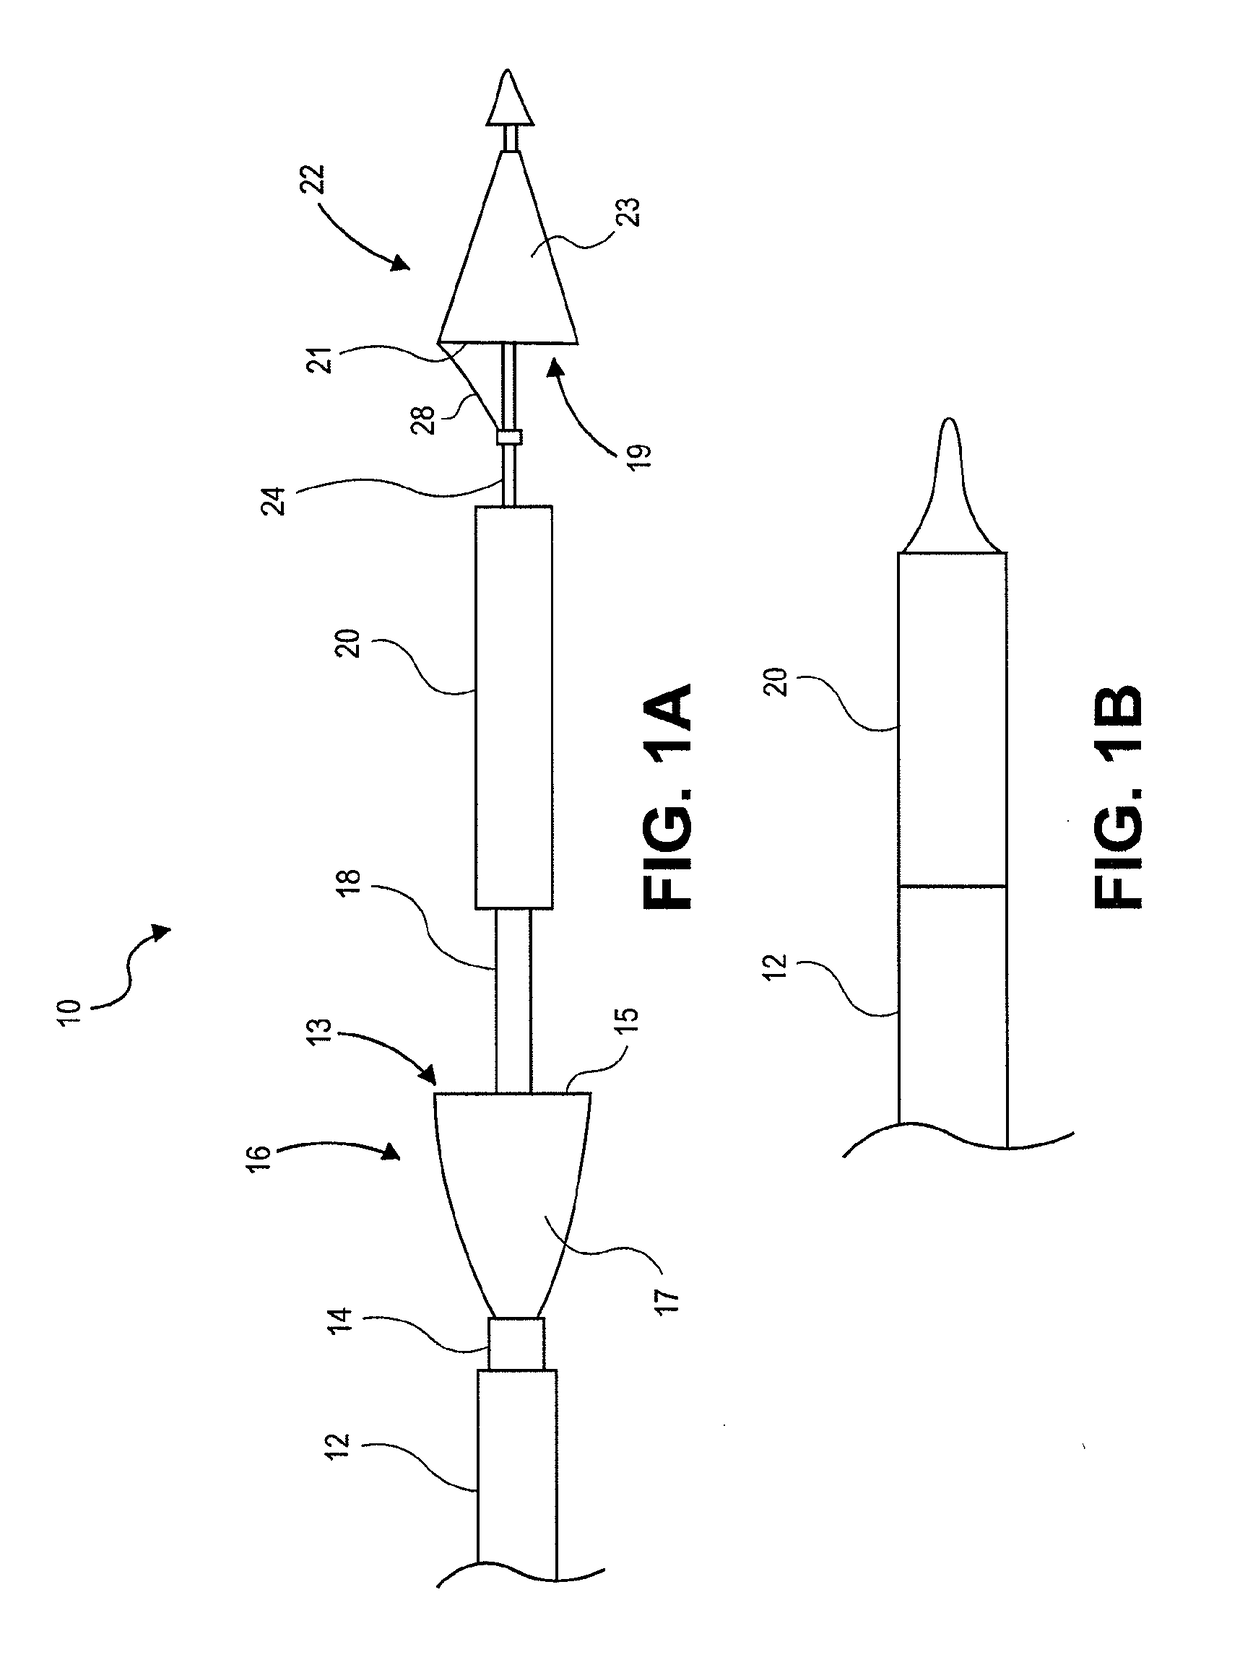 Intravascular blood filters and methods of use